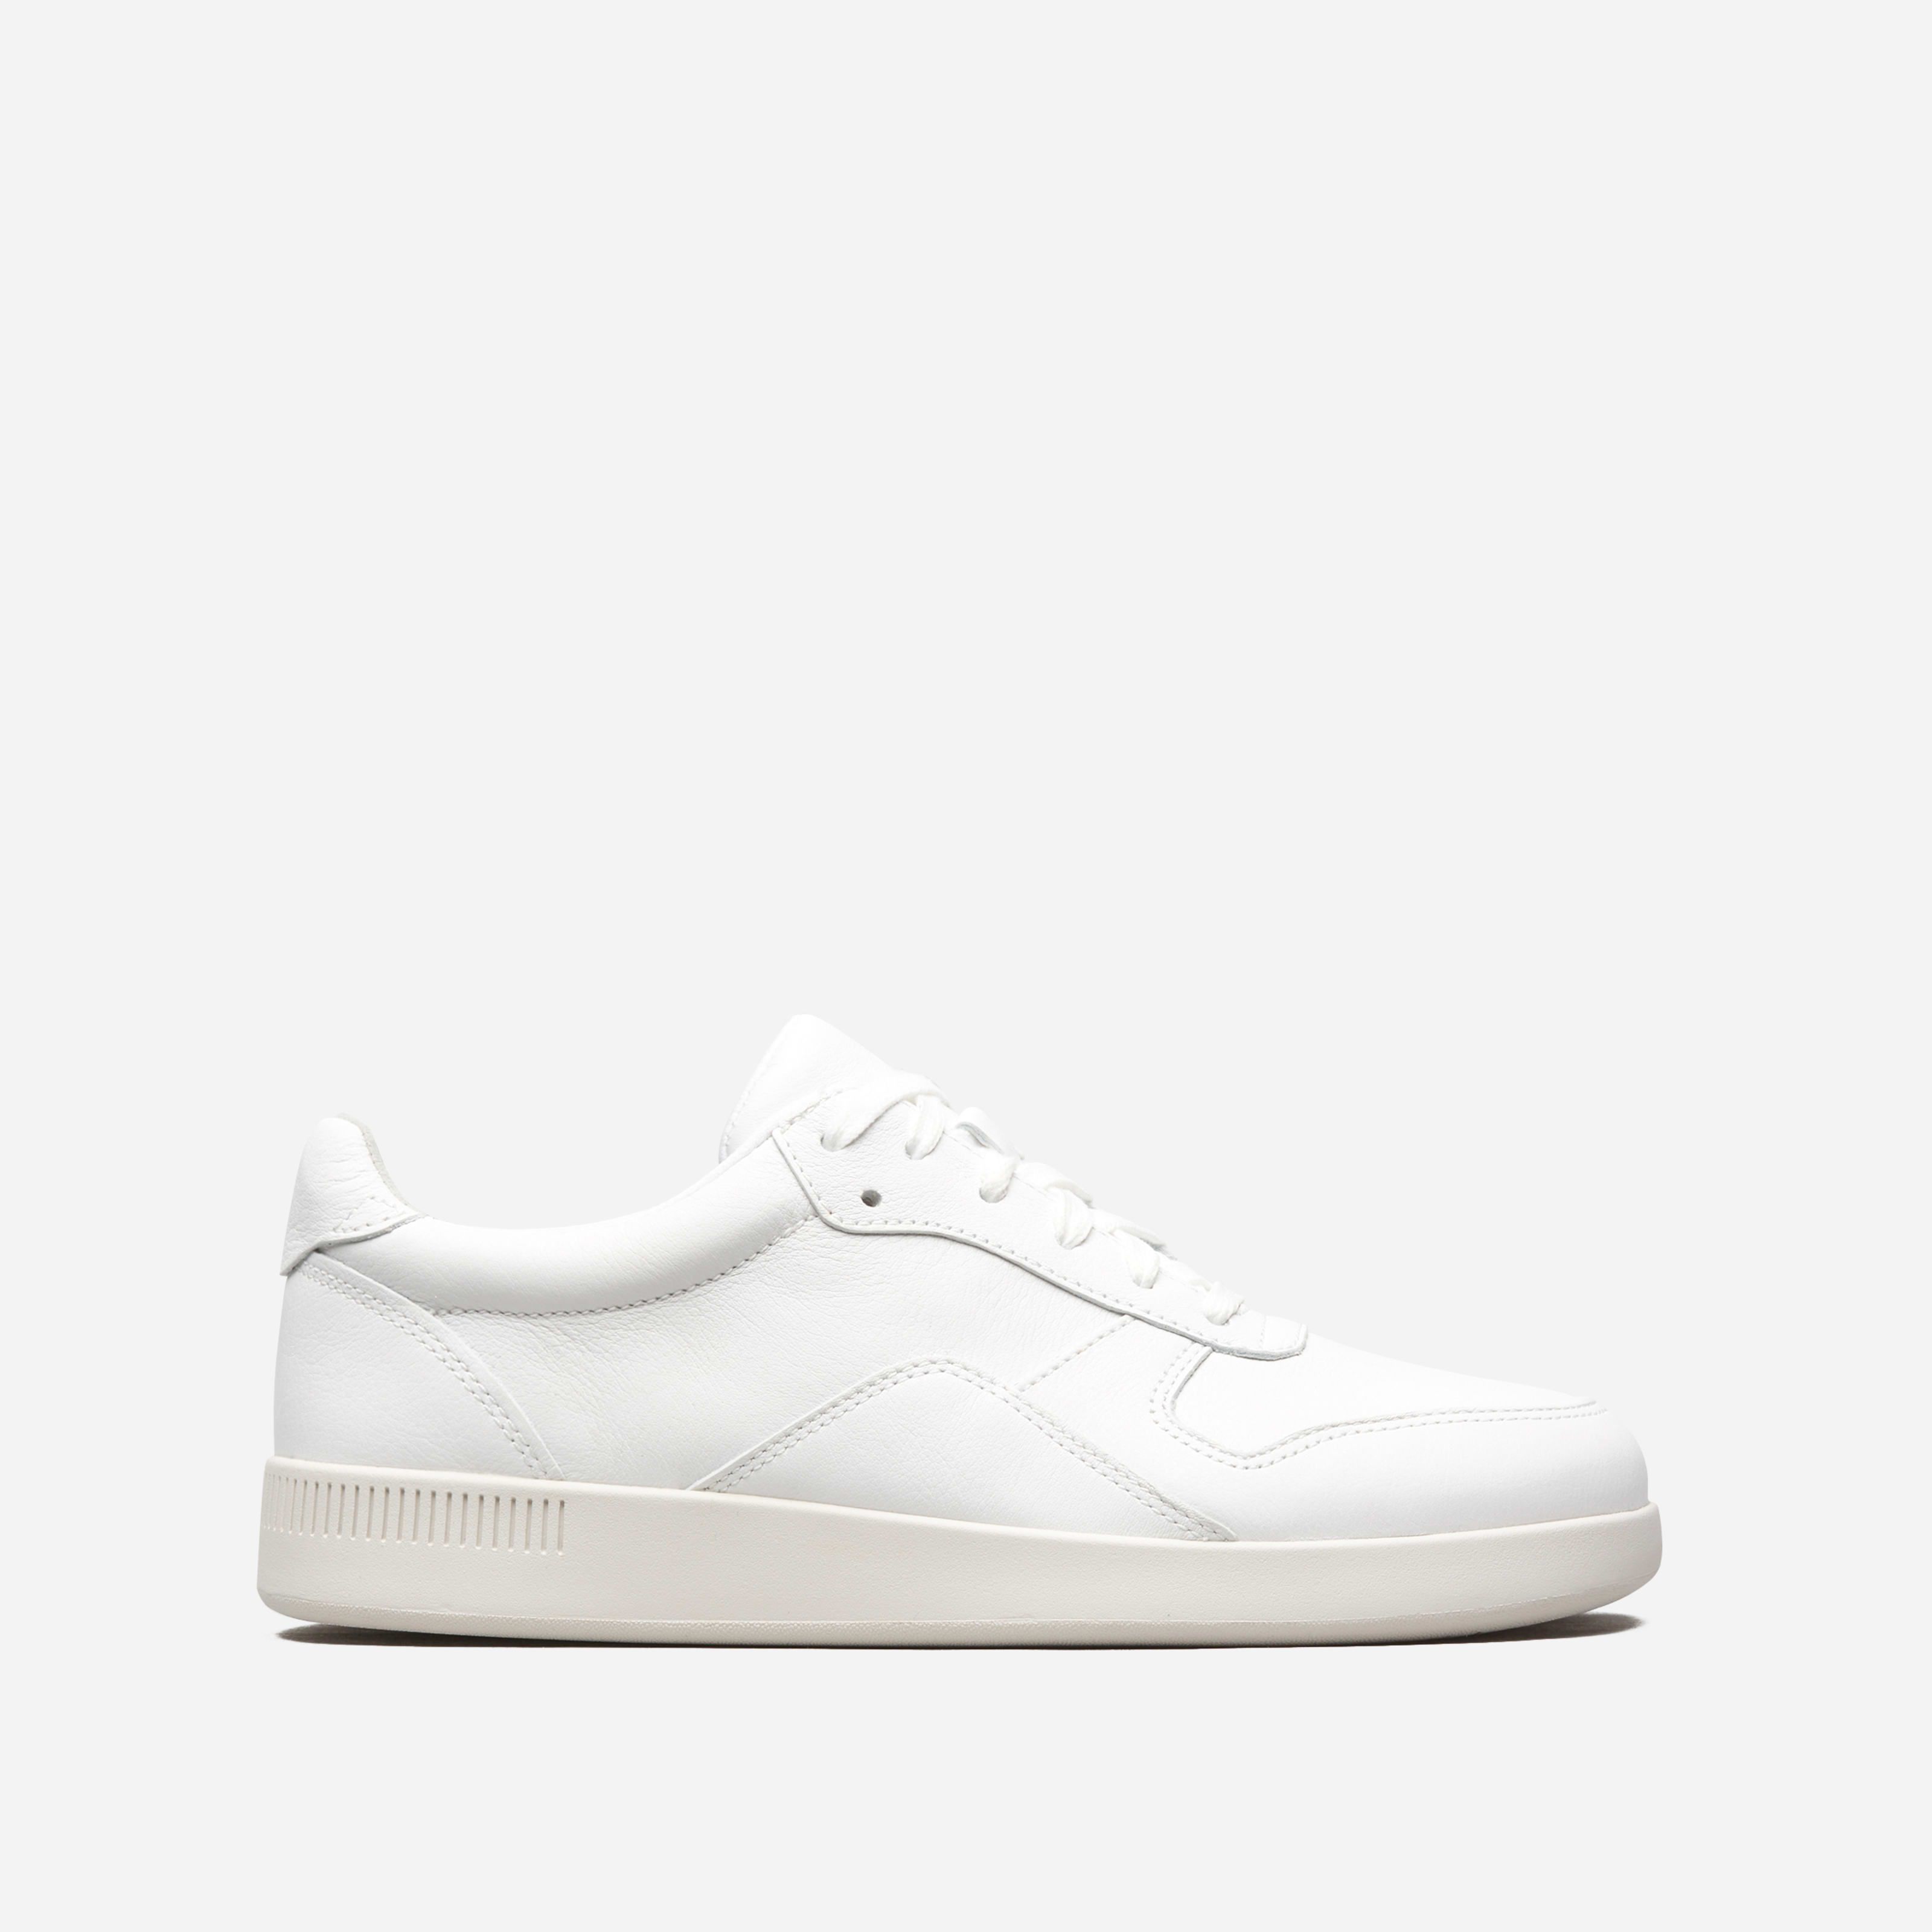 Men's Court Sneaker by Everlane in White, Size W9.5M7.5 | Everlane